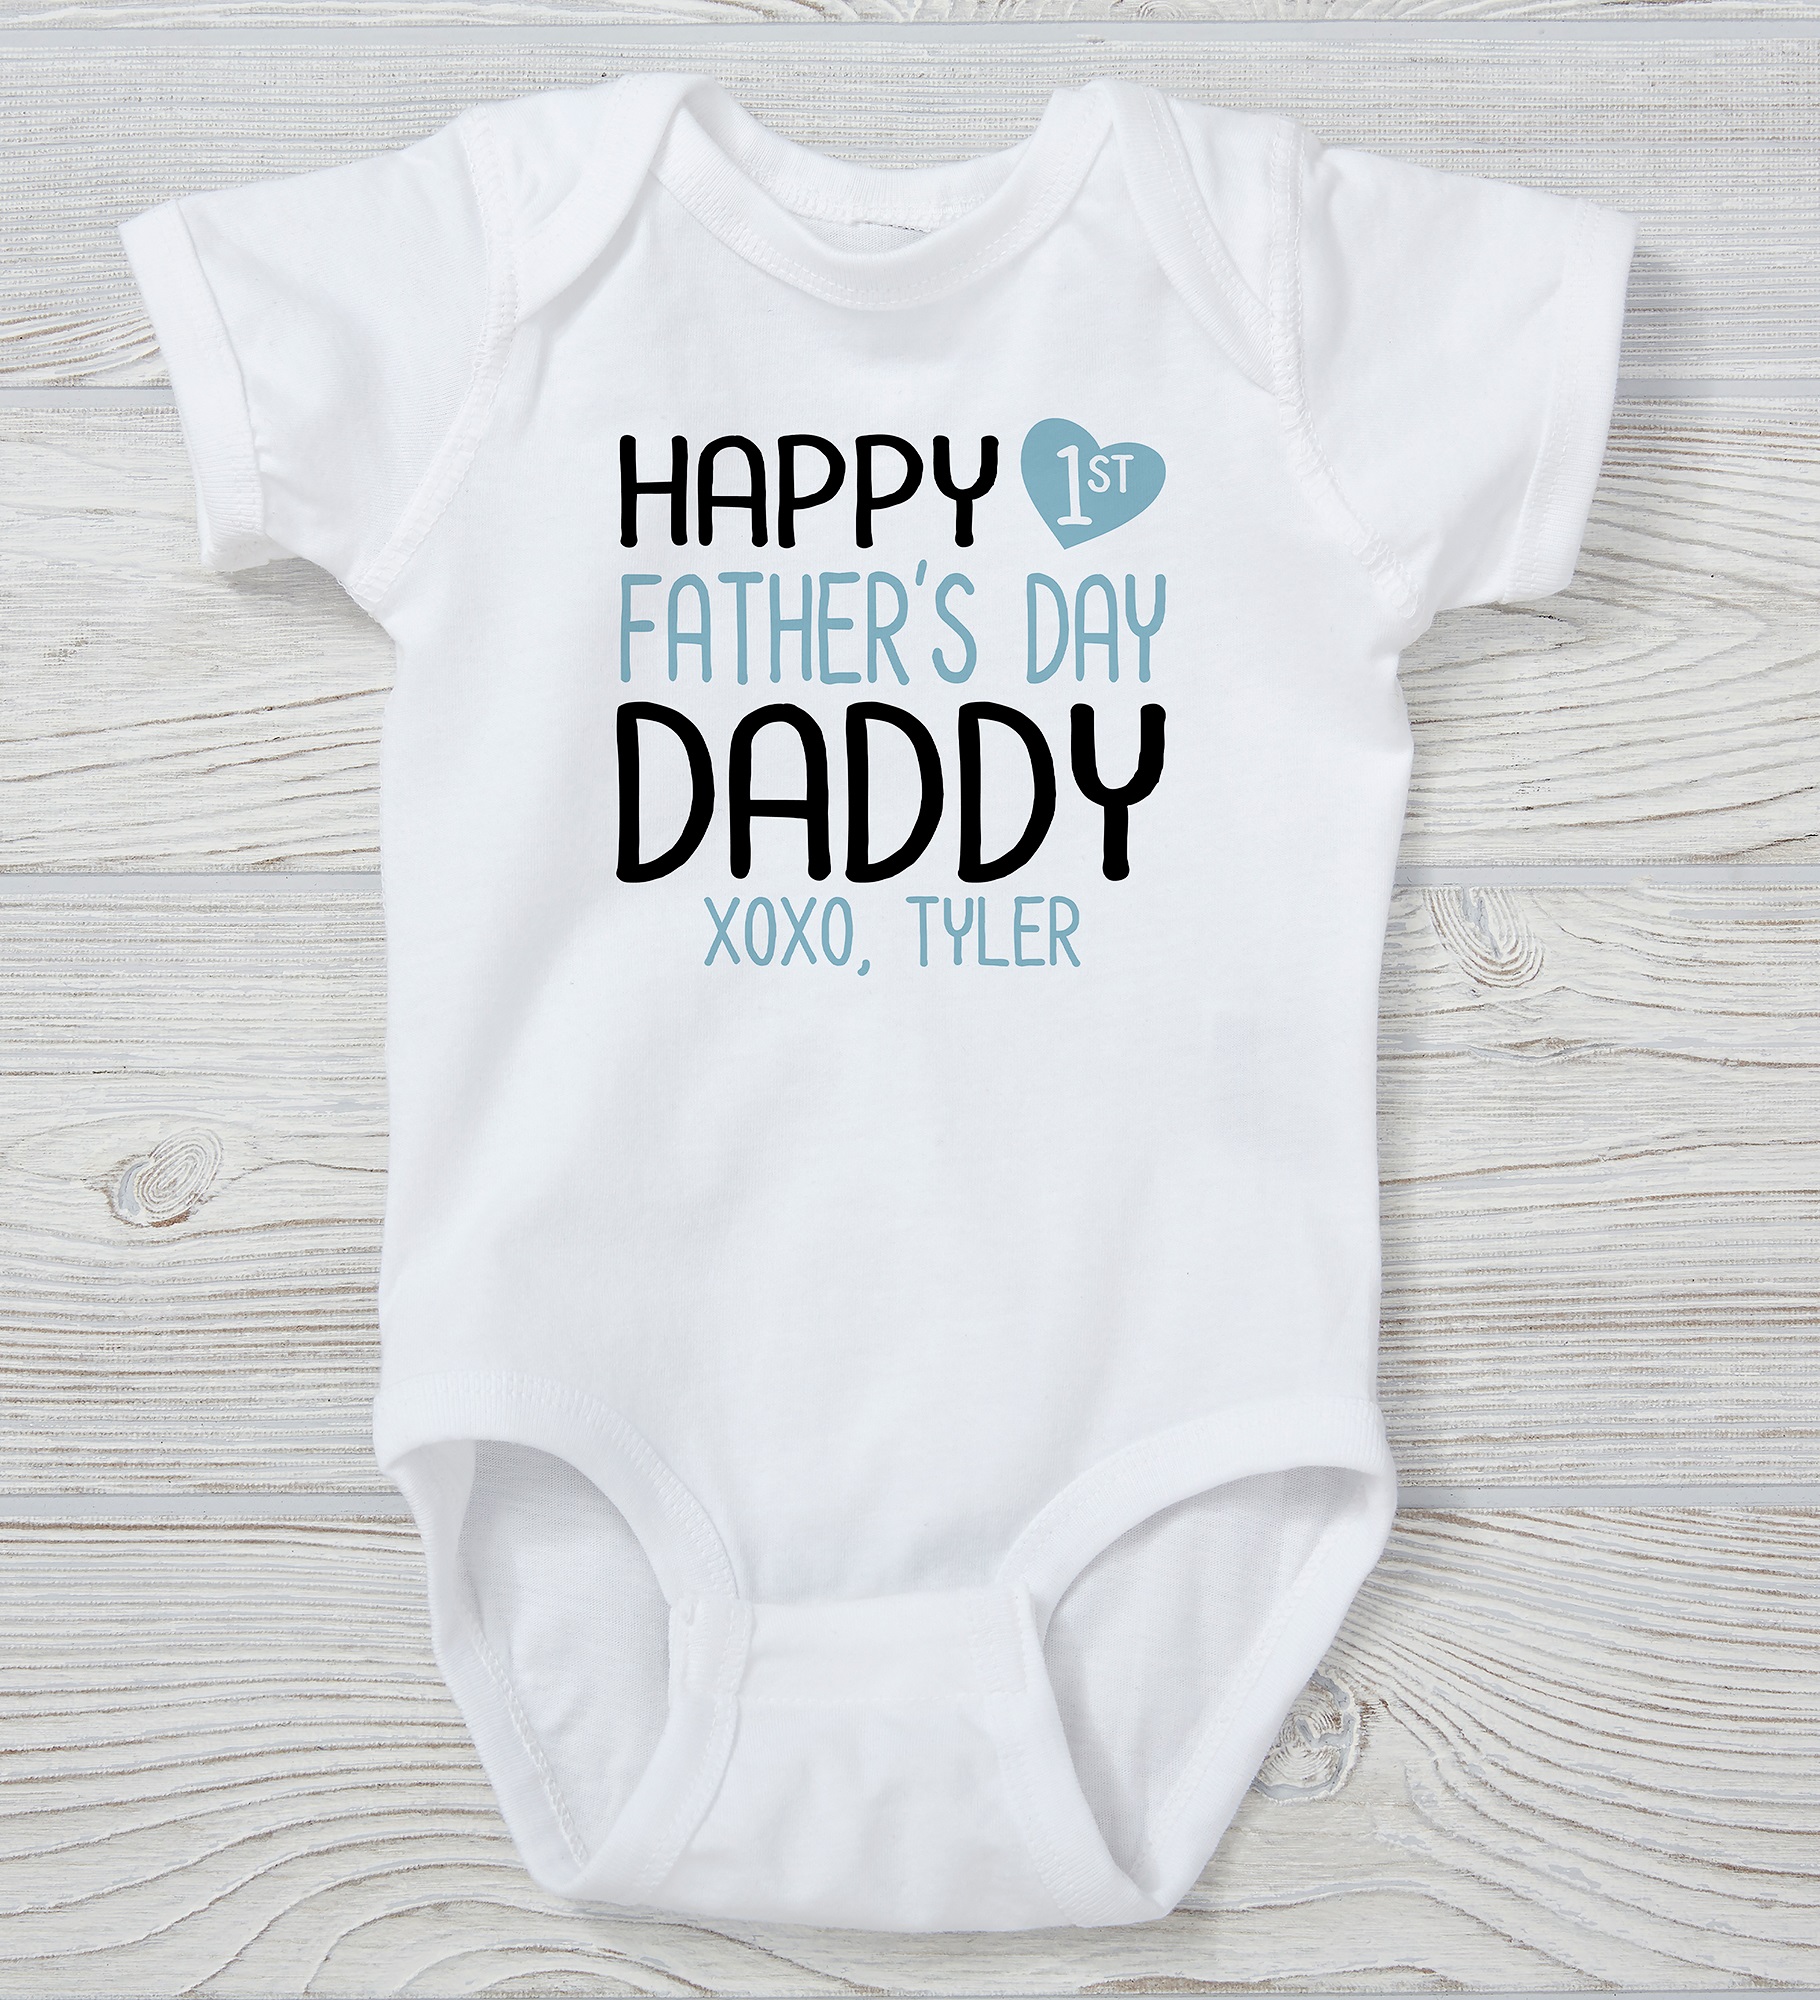 Happy First Father's Day Personalized Baby Clothing